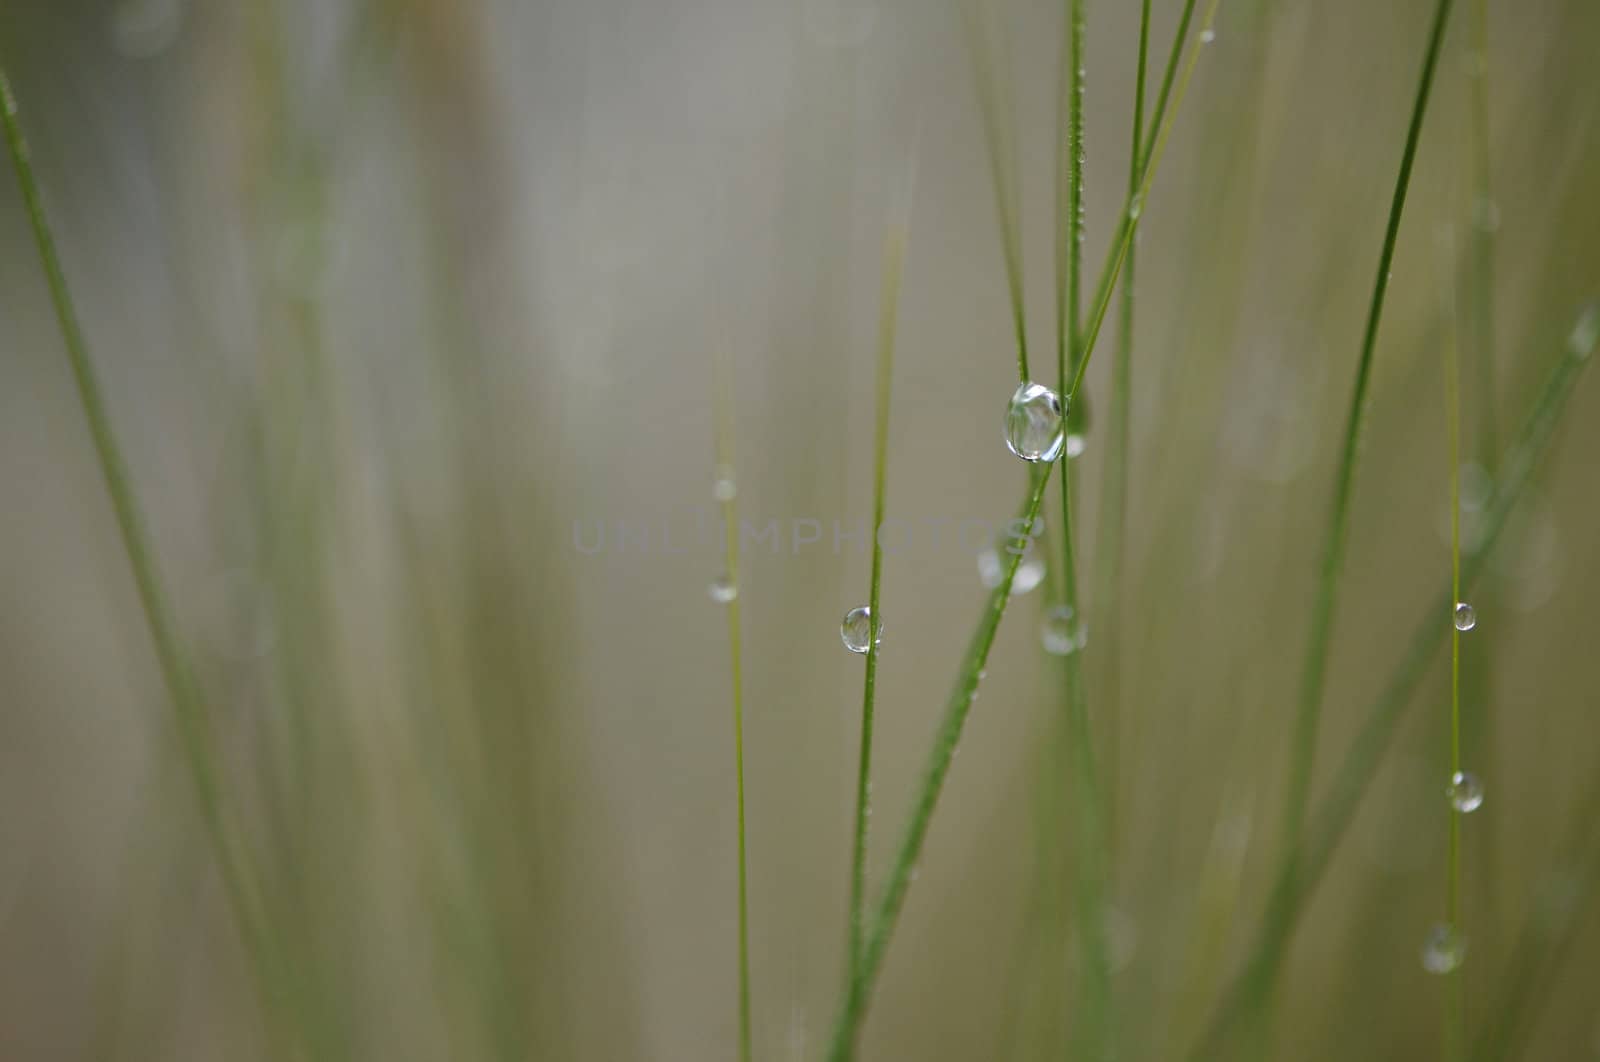 Some Water Droplets on Grass Stems with a Blurred Background